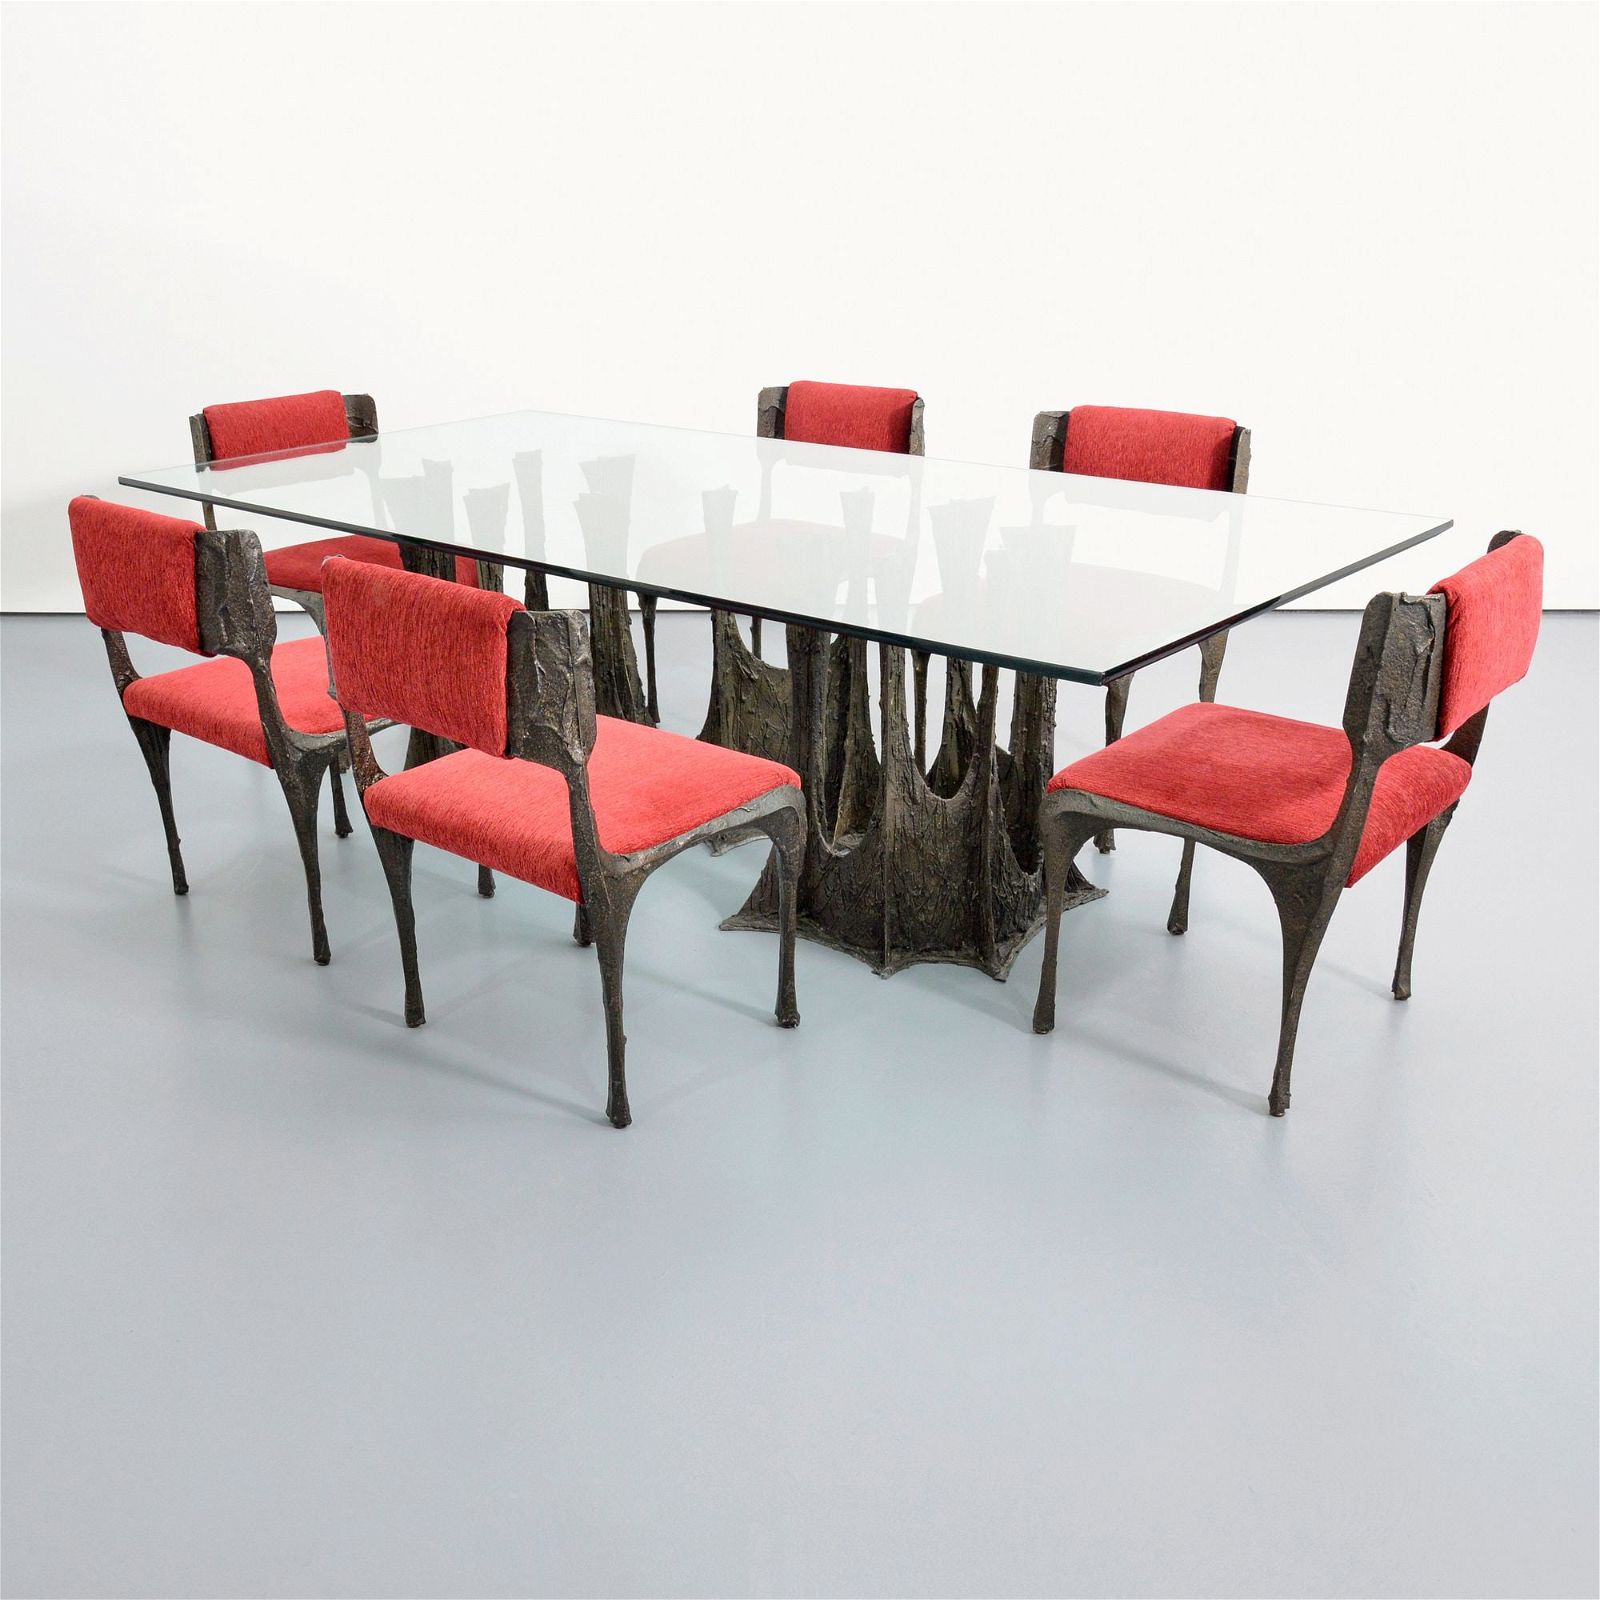 Visible in the lot images for both the Paul Evans side chairs and Stalagmite table are shots showing the furnishings together, as the consignor used them. Offered as separate, subsequent lots, the table sold for $26,800 and the chairs for $64,000 at Palm Beach Modern Auctions.
